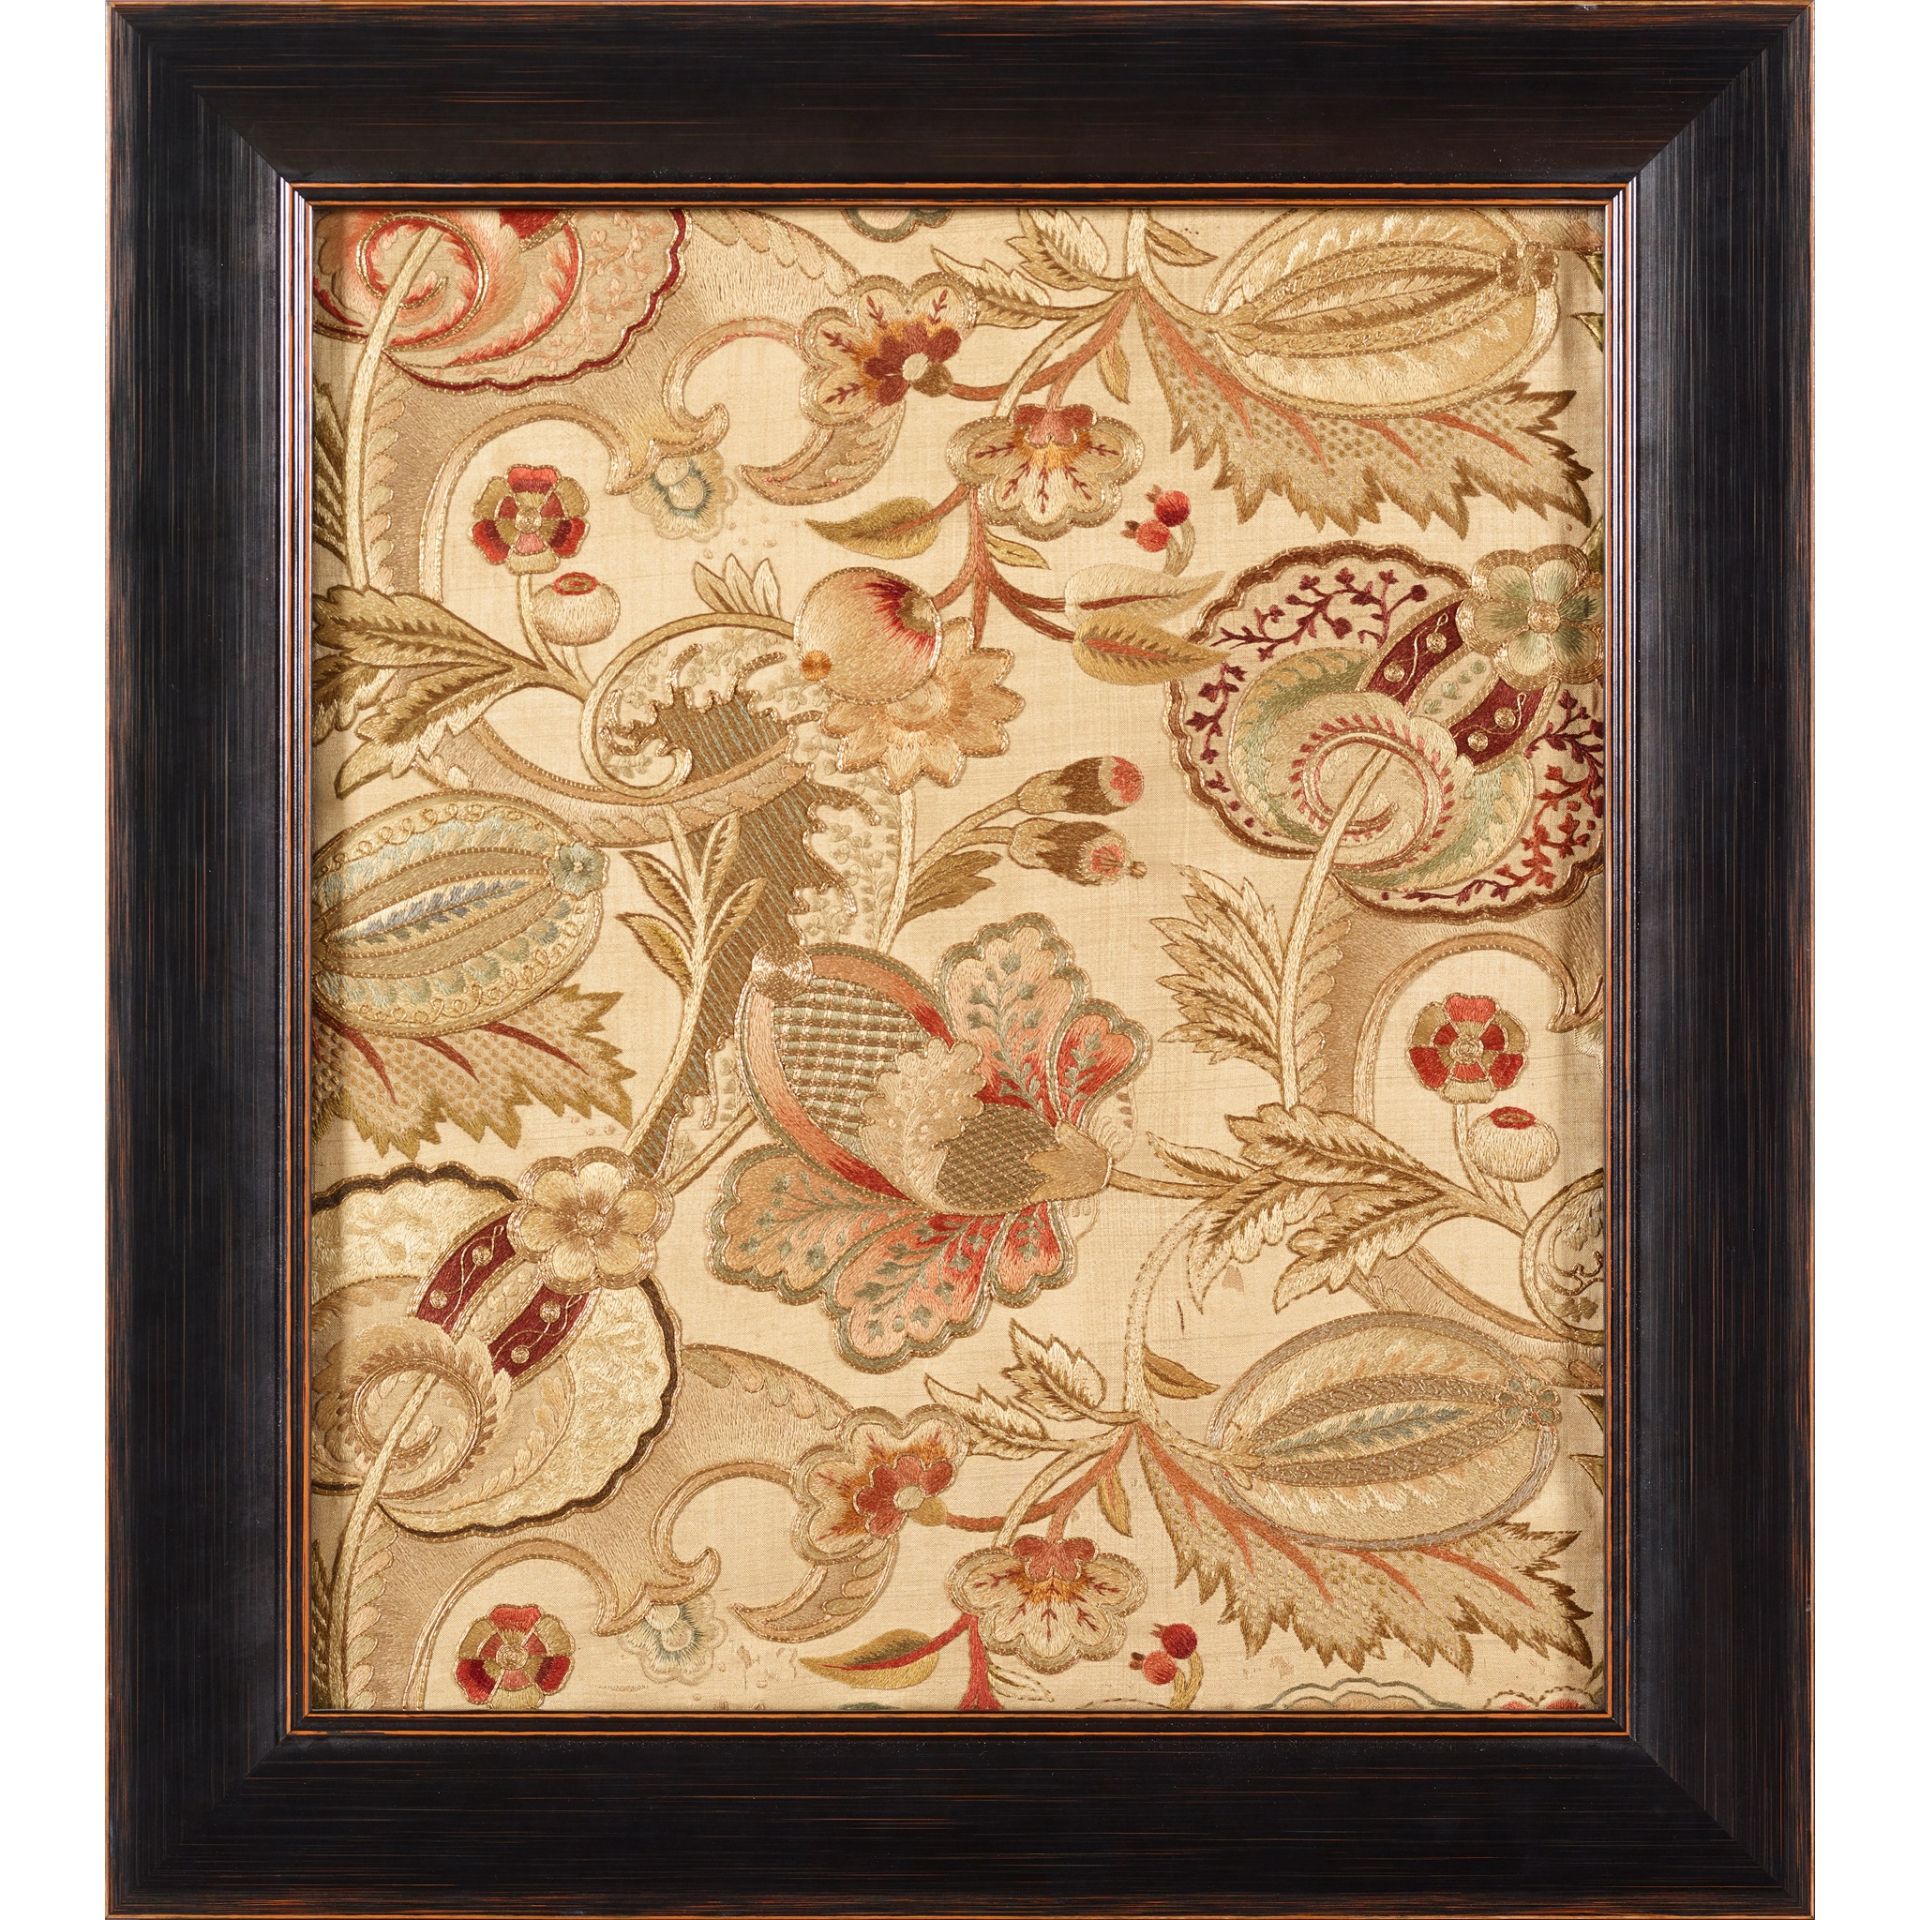 LEEK SCHOOL OF EMBROIDERY ARTS AND CRAFTS EMBROIDERED PANEL, CIRCA 1890 - Image 2 of 3